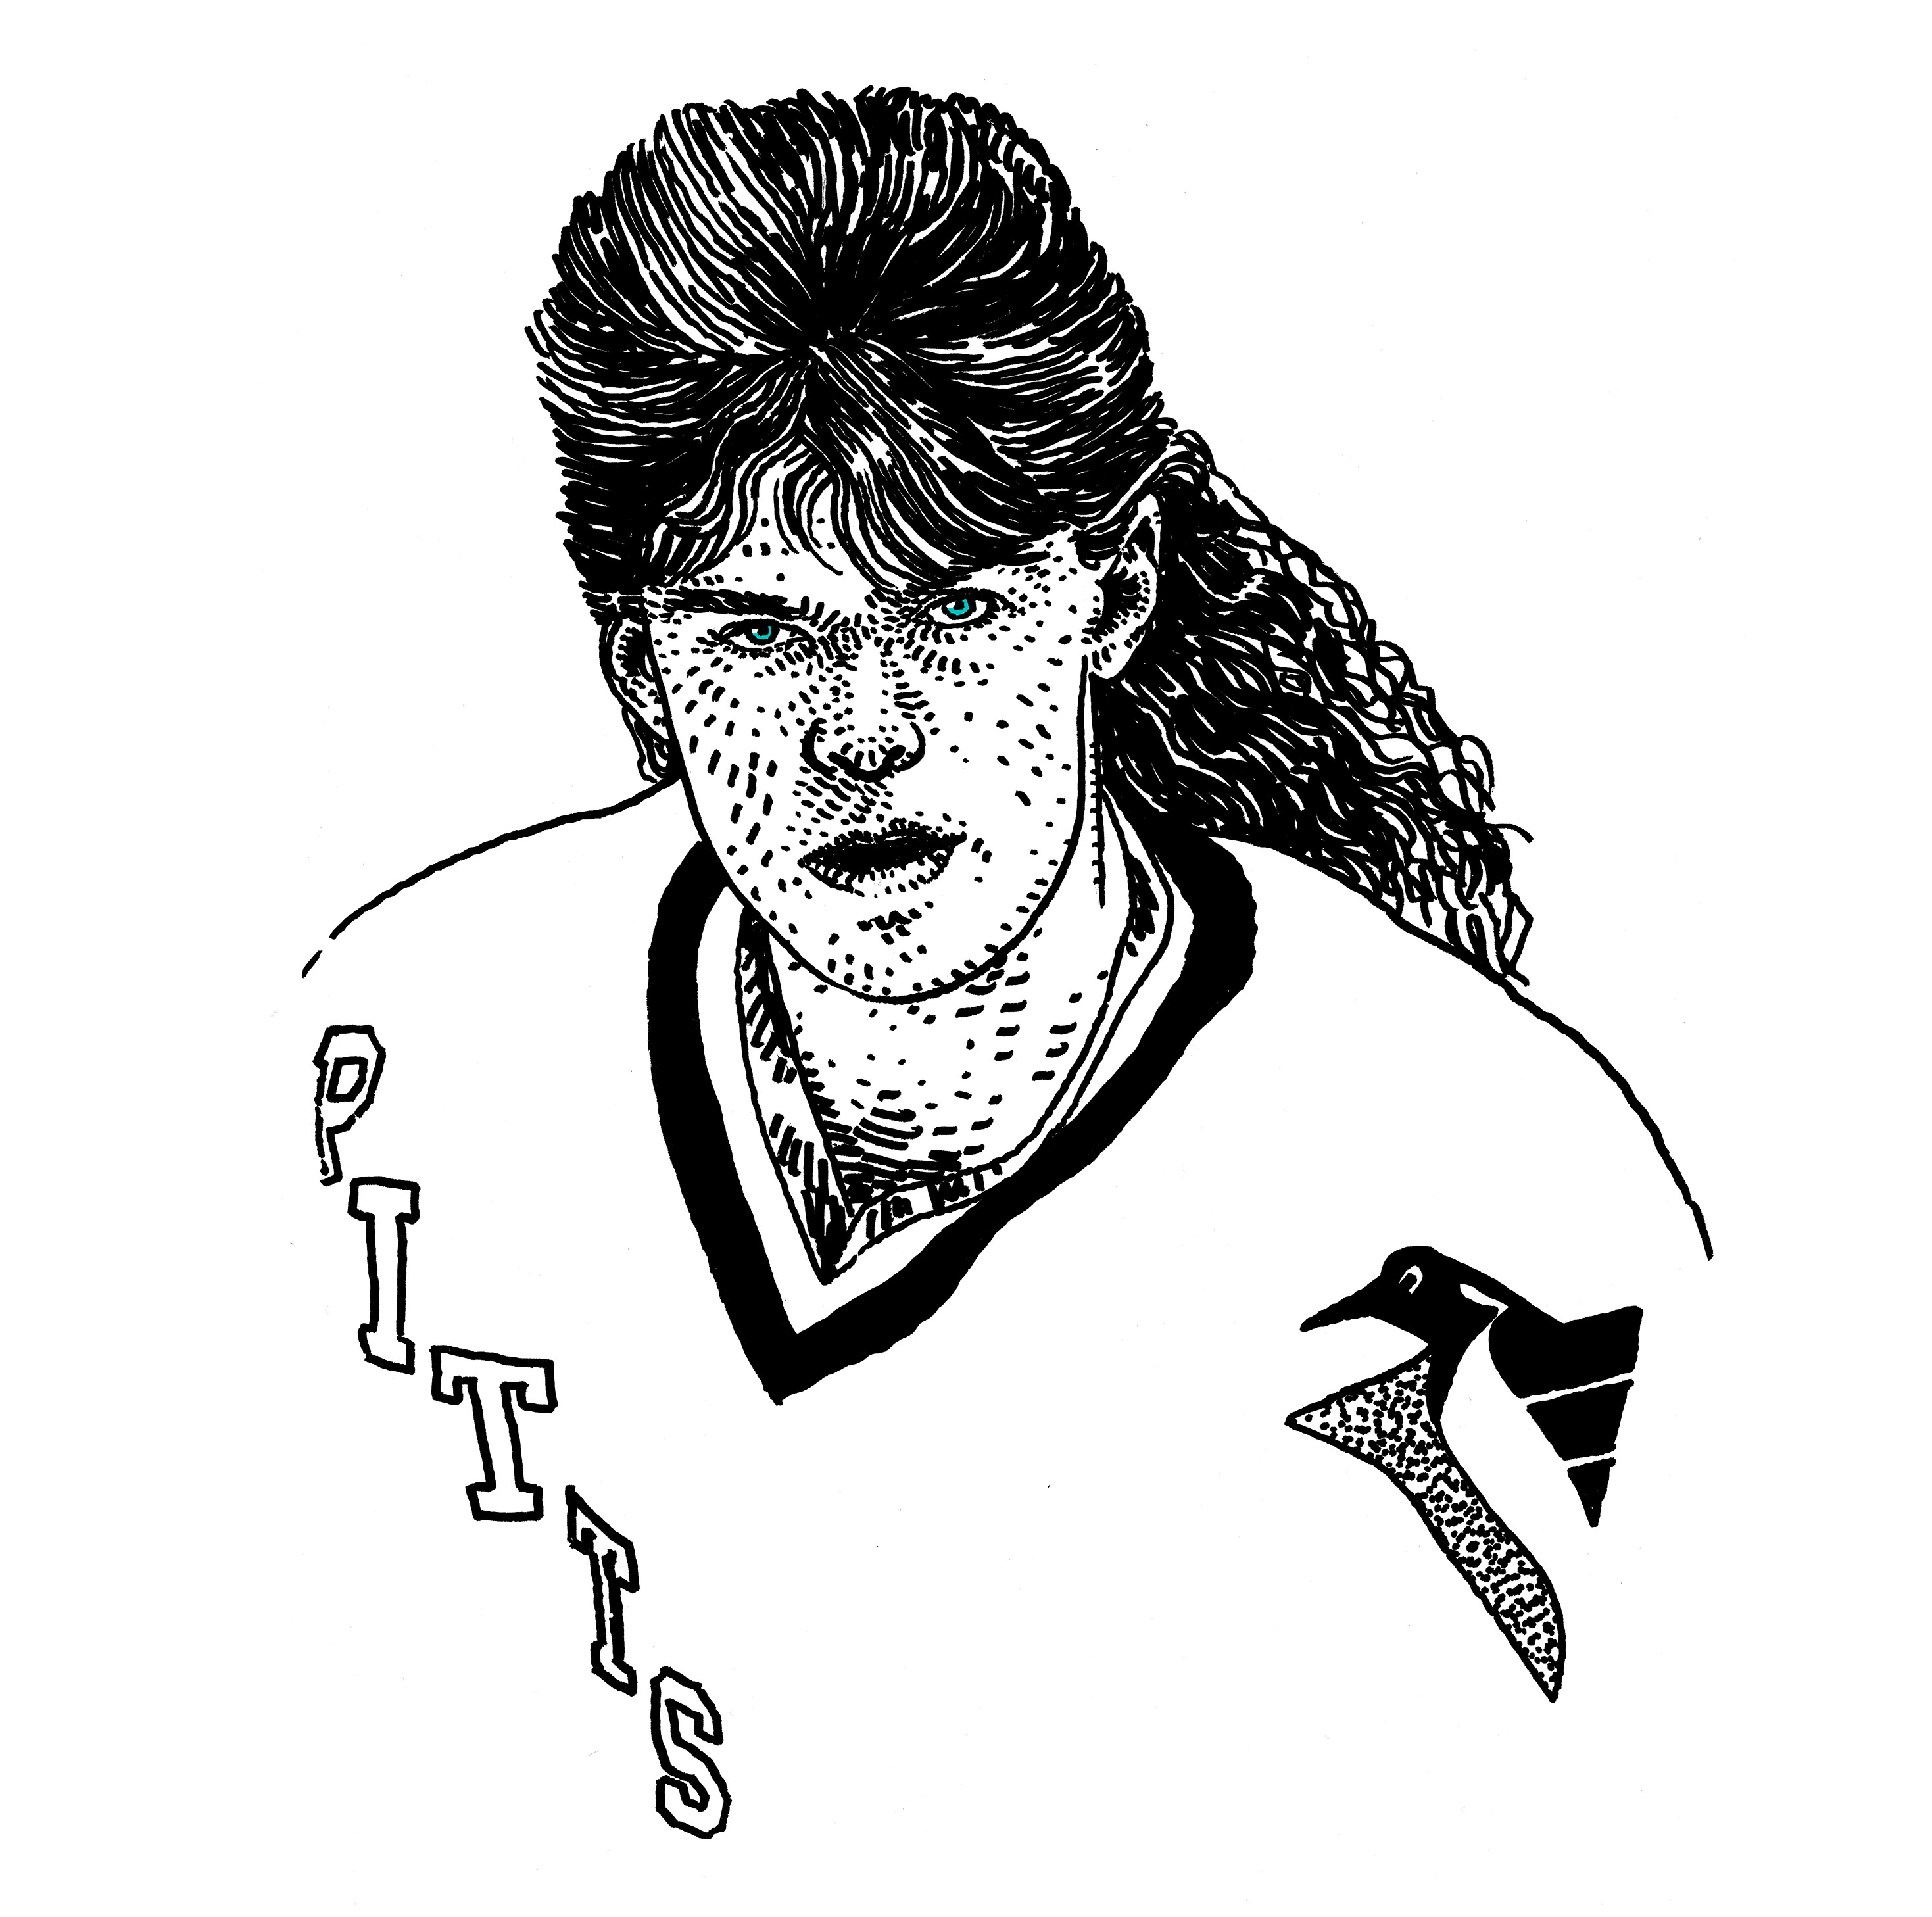 Jaromir Jagr on X: 25 years ago, My first NHL game, started the